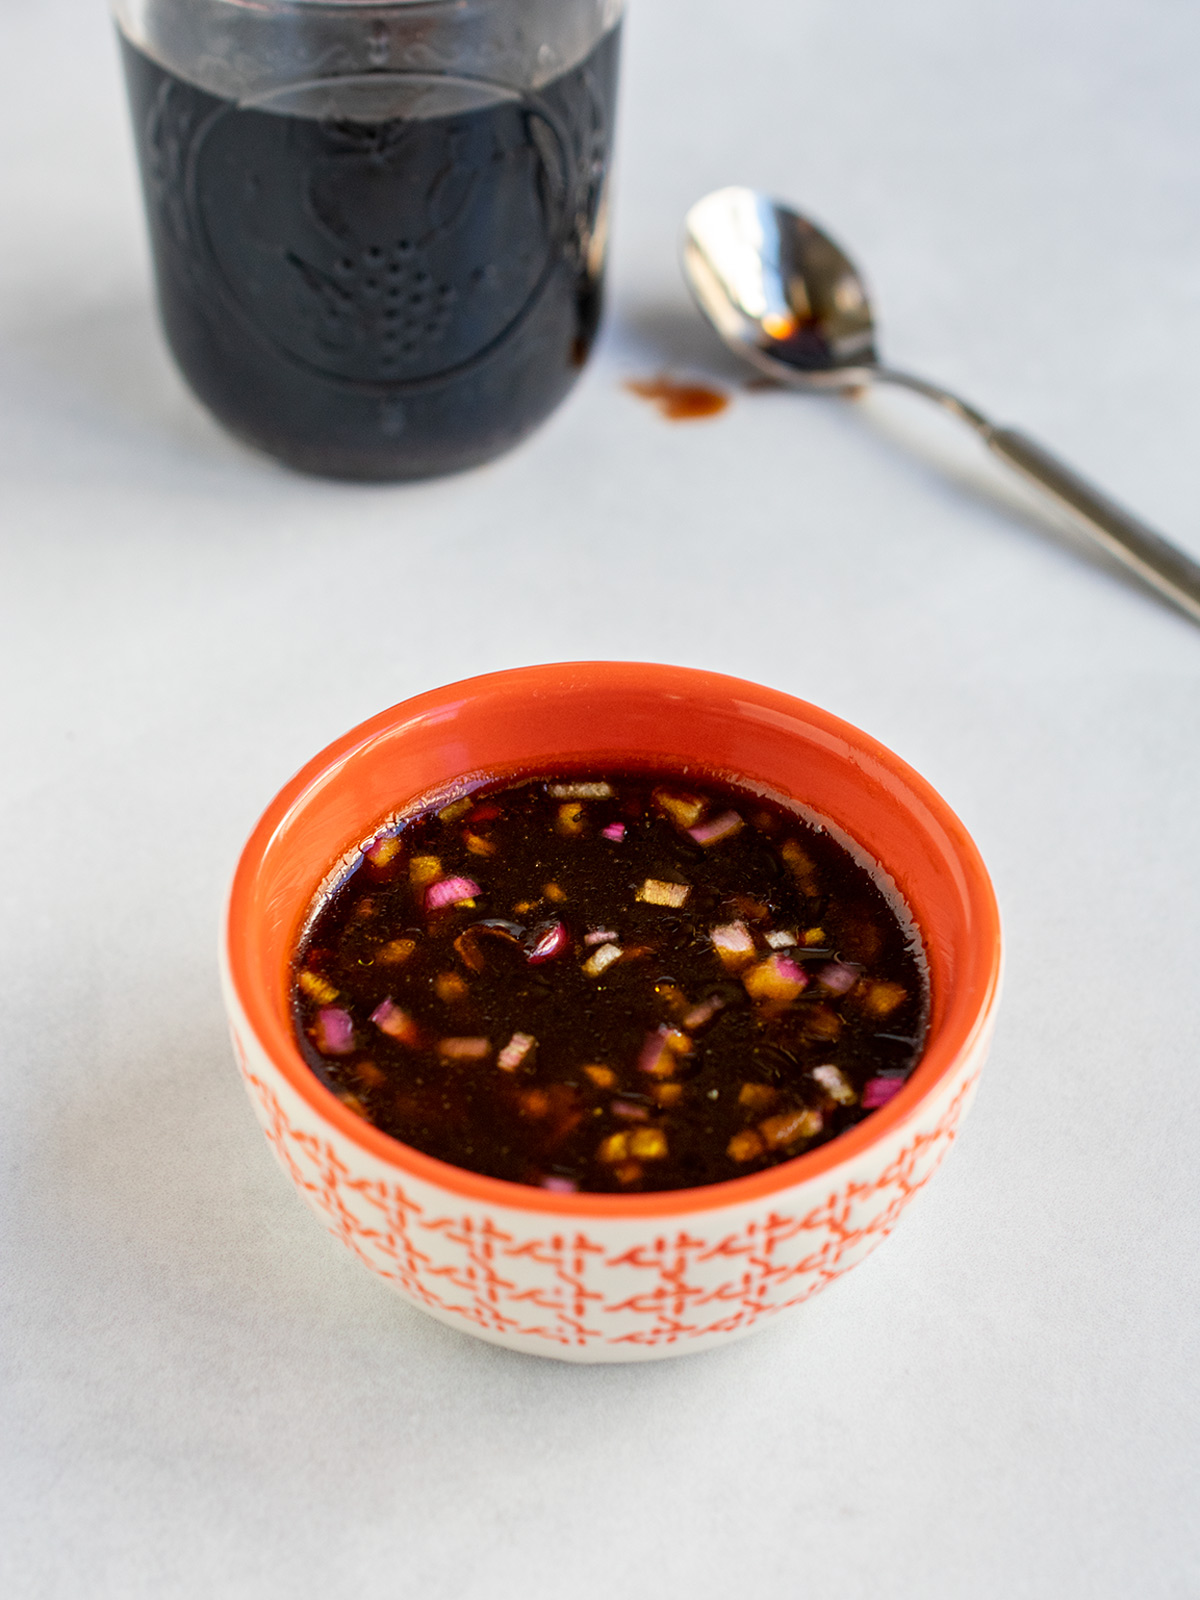 Pomegranate molasses dressing in an orange bowl with a jar of pomegranate molasses in the background with a spoon.